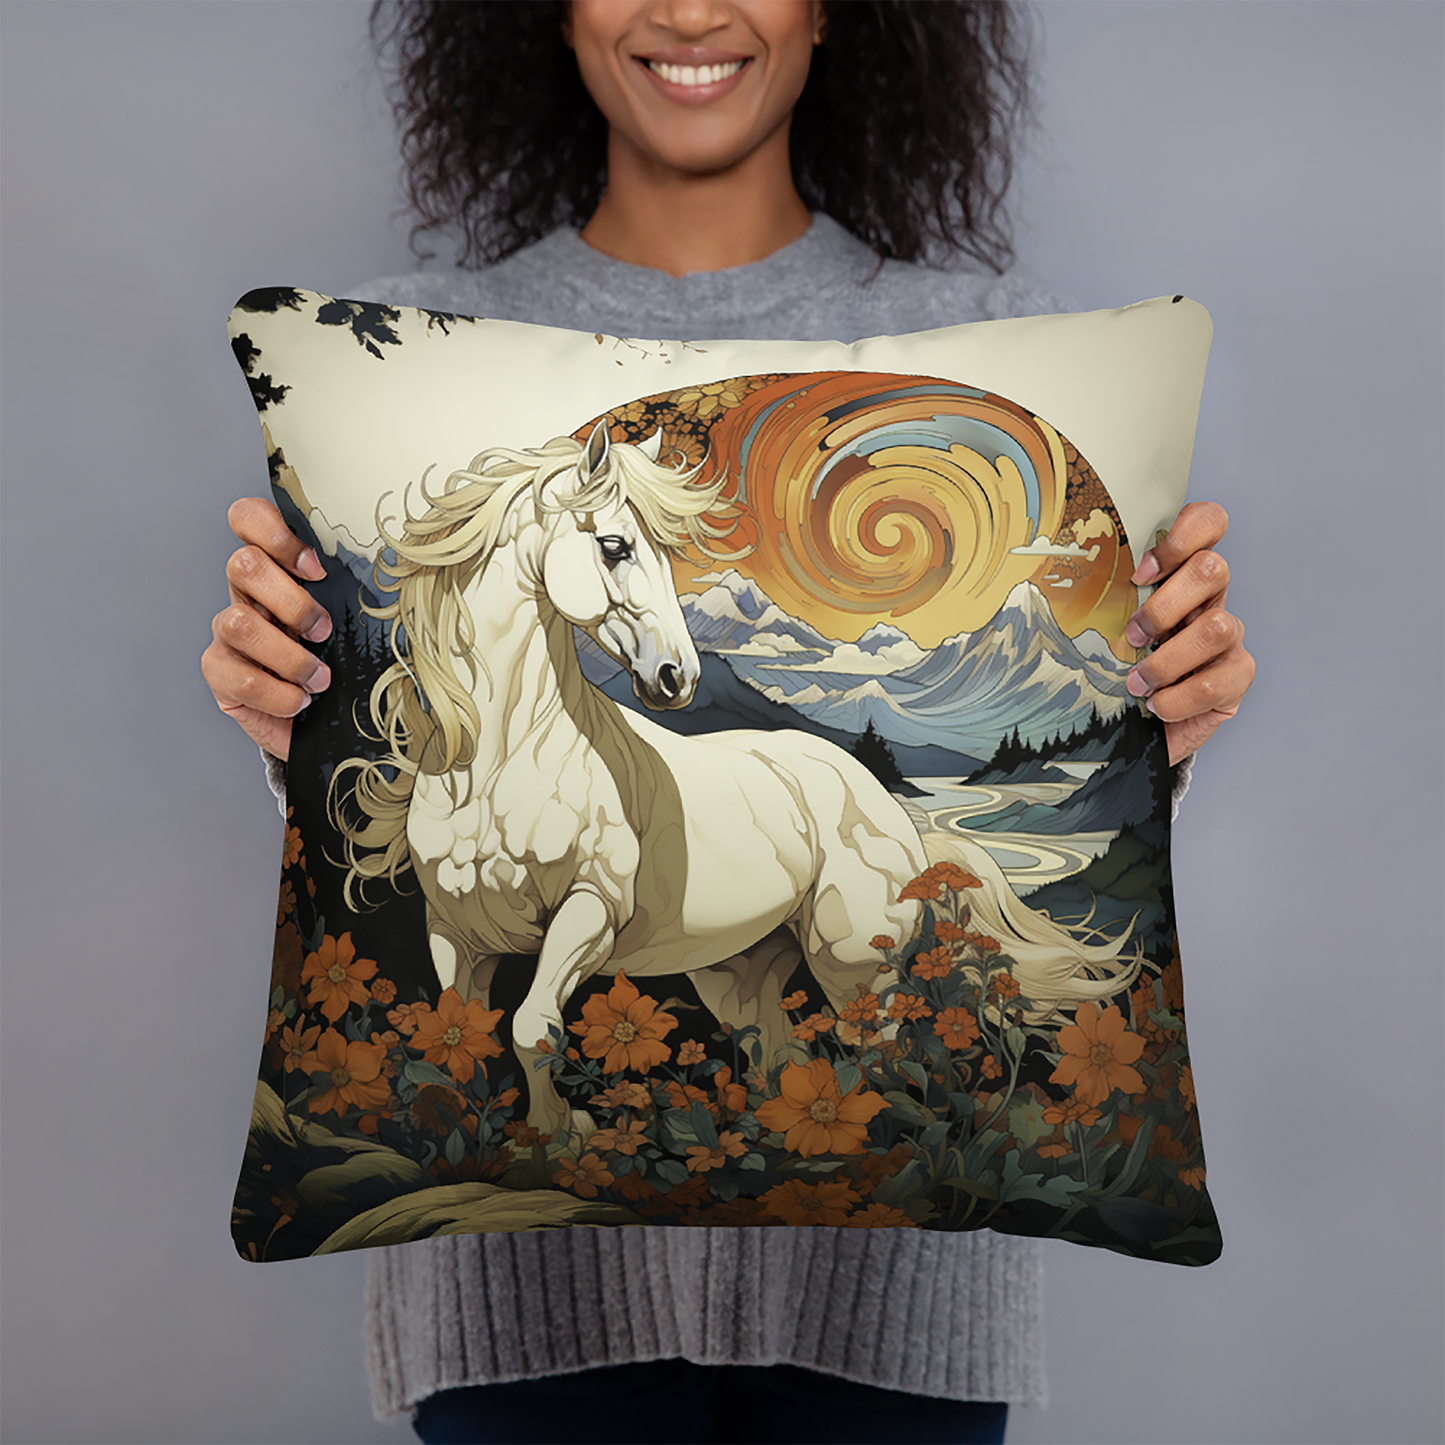 Horse Throw Pillow Sunburst Horse and Floral Fantasy Polyester Decorative Cushion 18x18